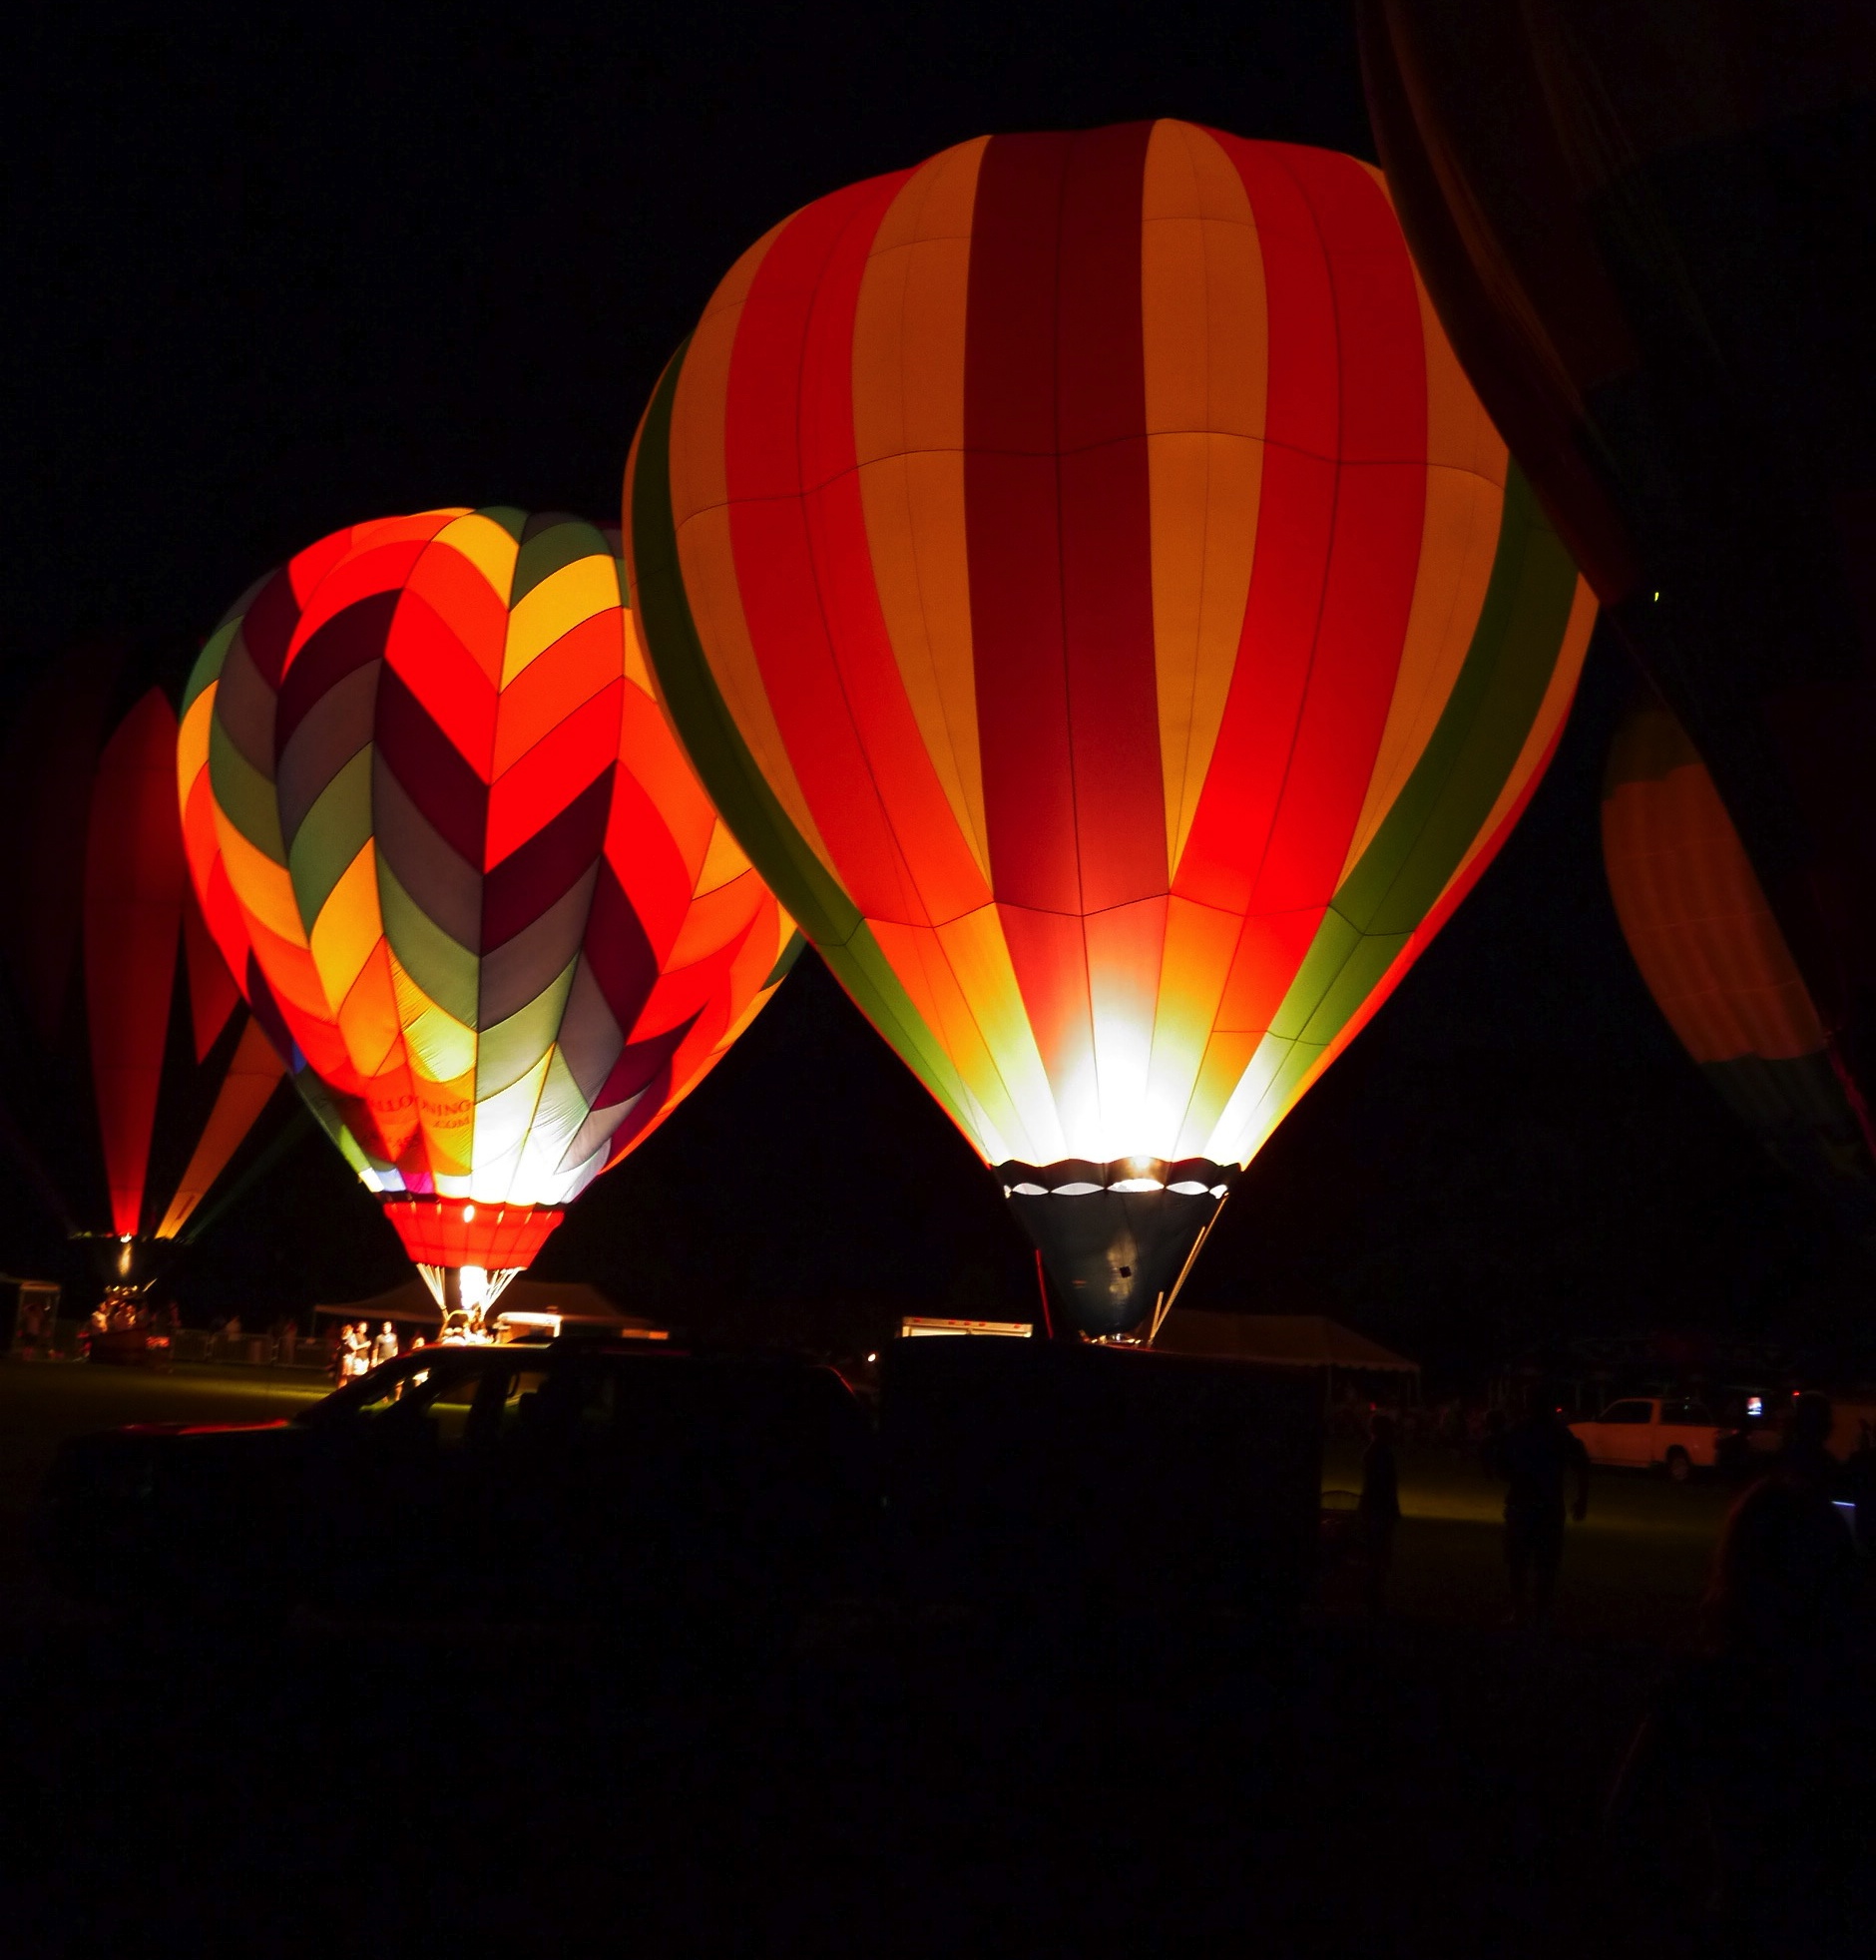 Chester County Balloon Festival poised to soar